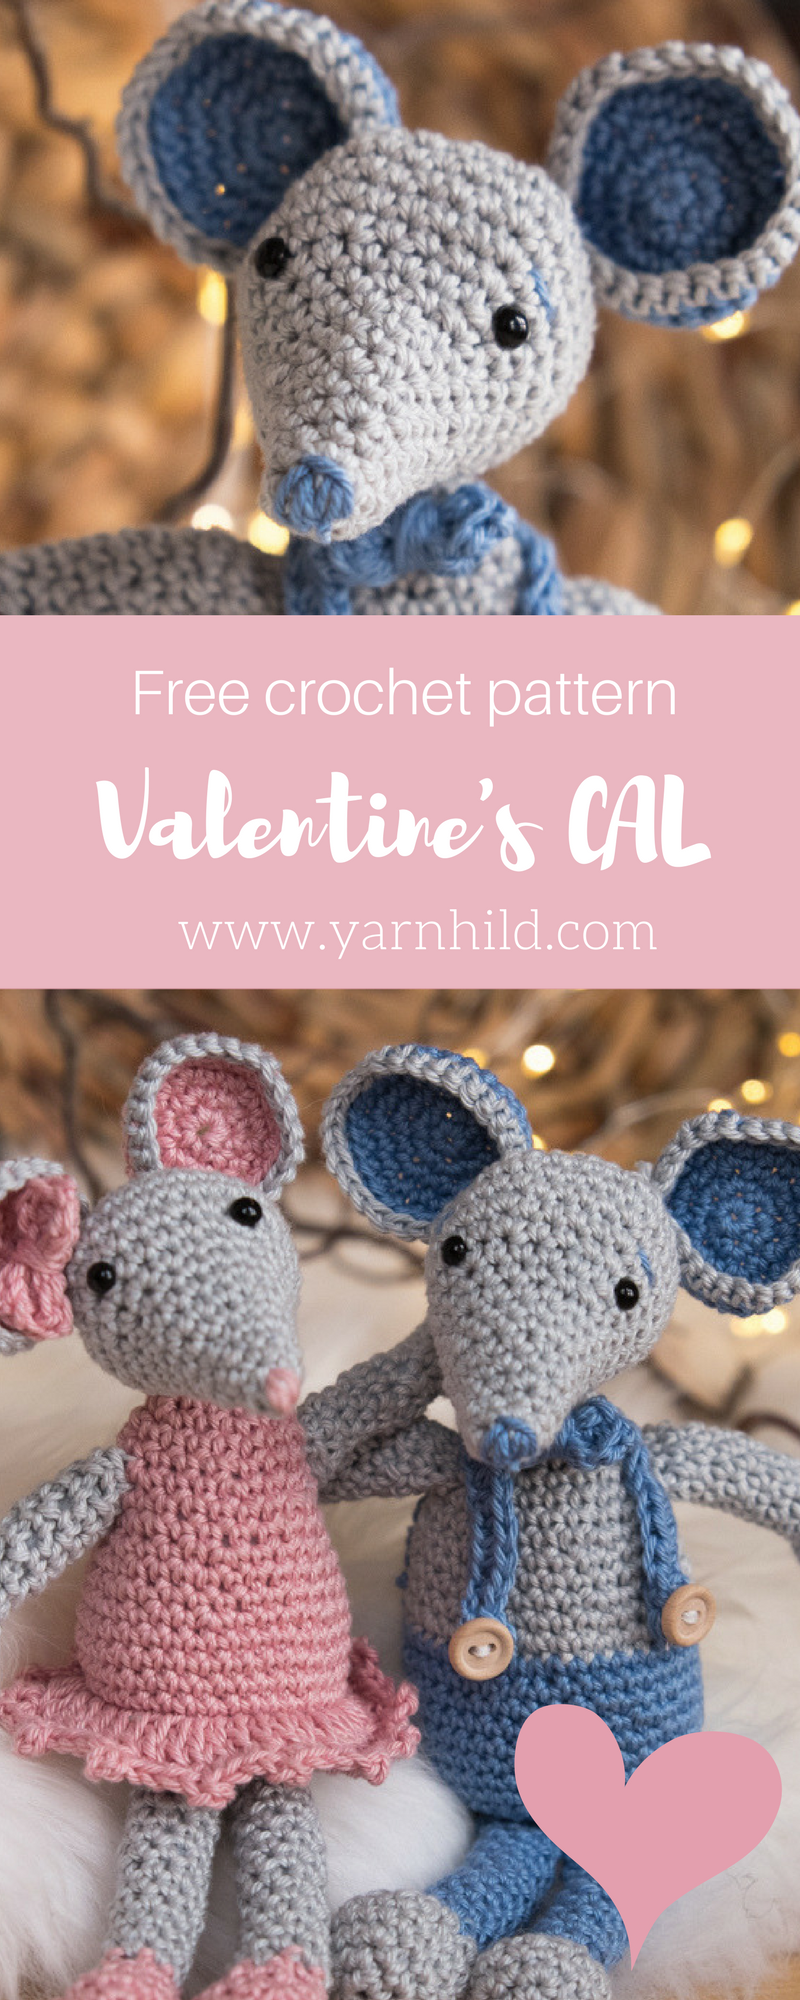 Free crochet pattern for this sweet mouse. 